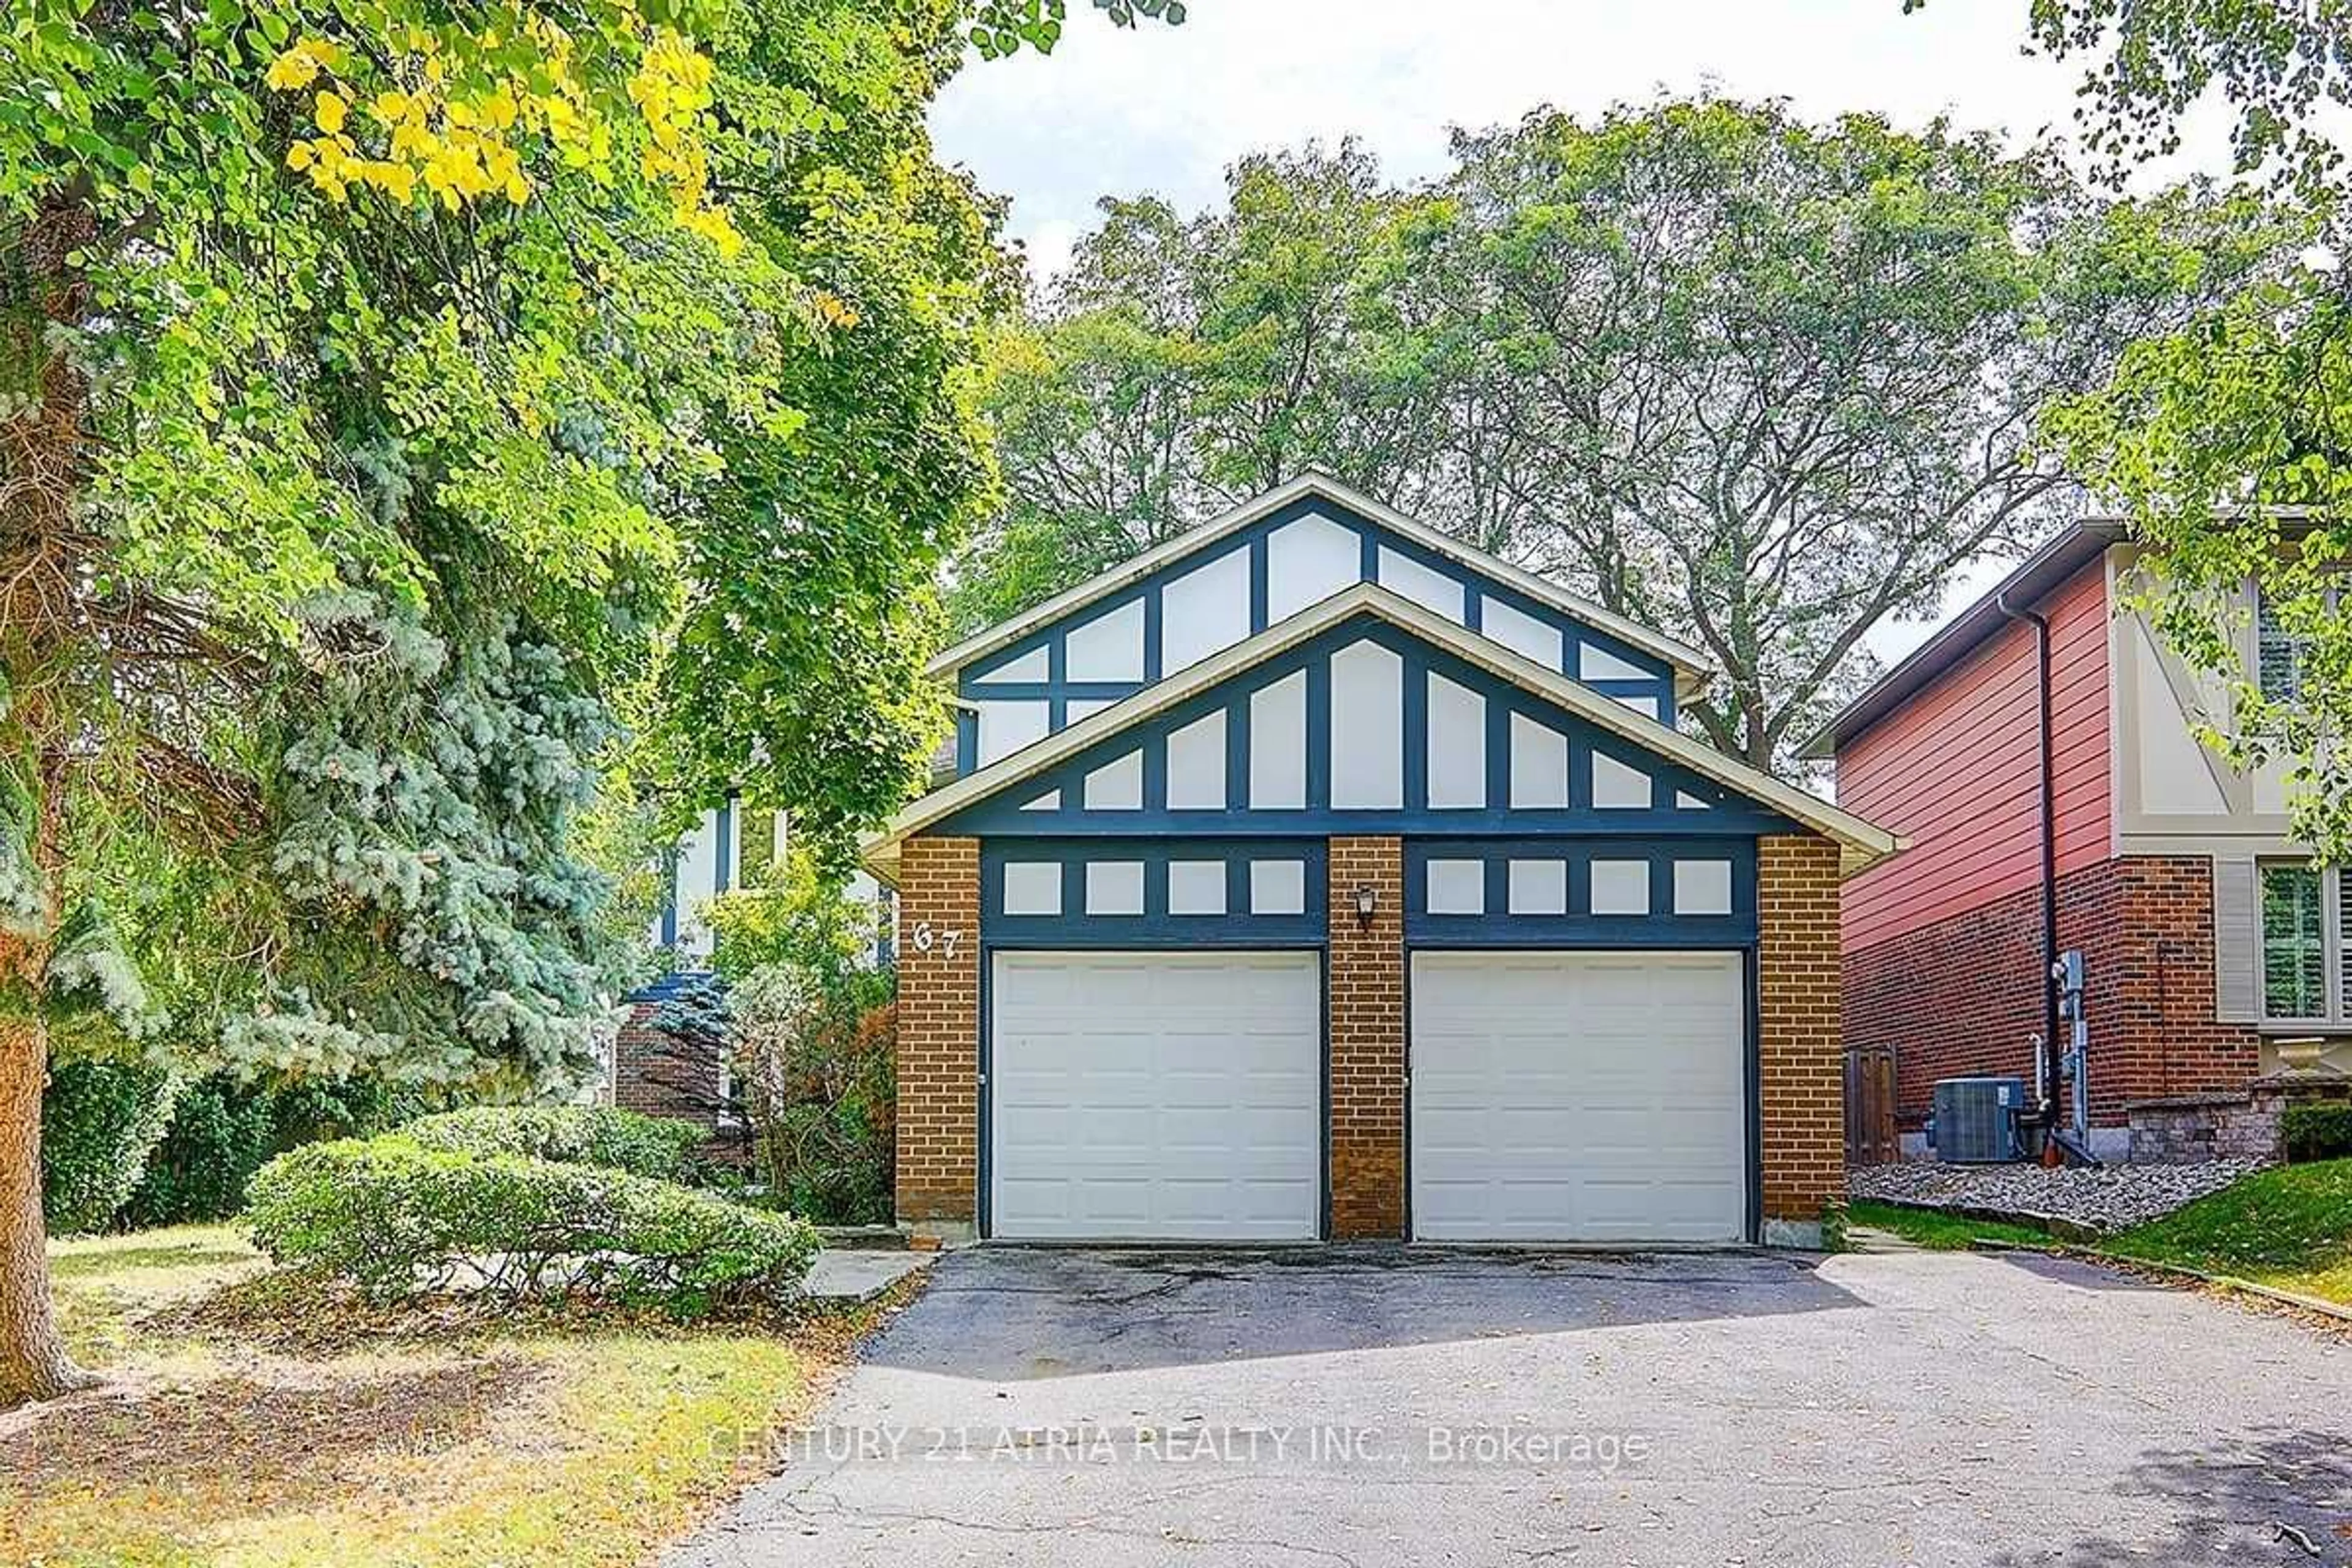 Home with brick exterior material for 67 Pinnacle Rd, Toronto Ontario M2L 2V6